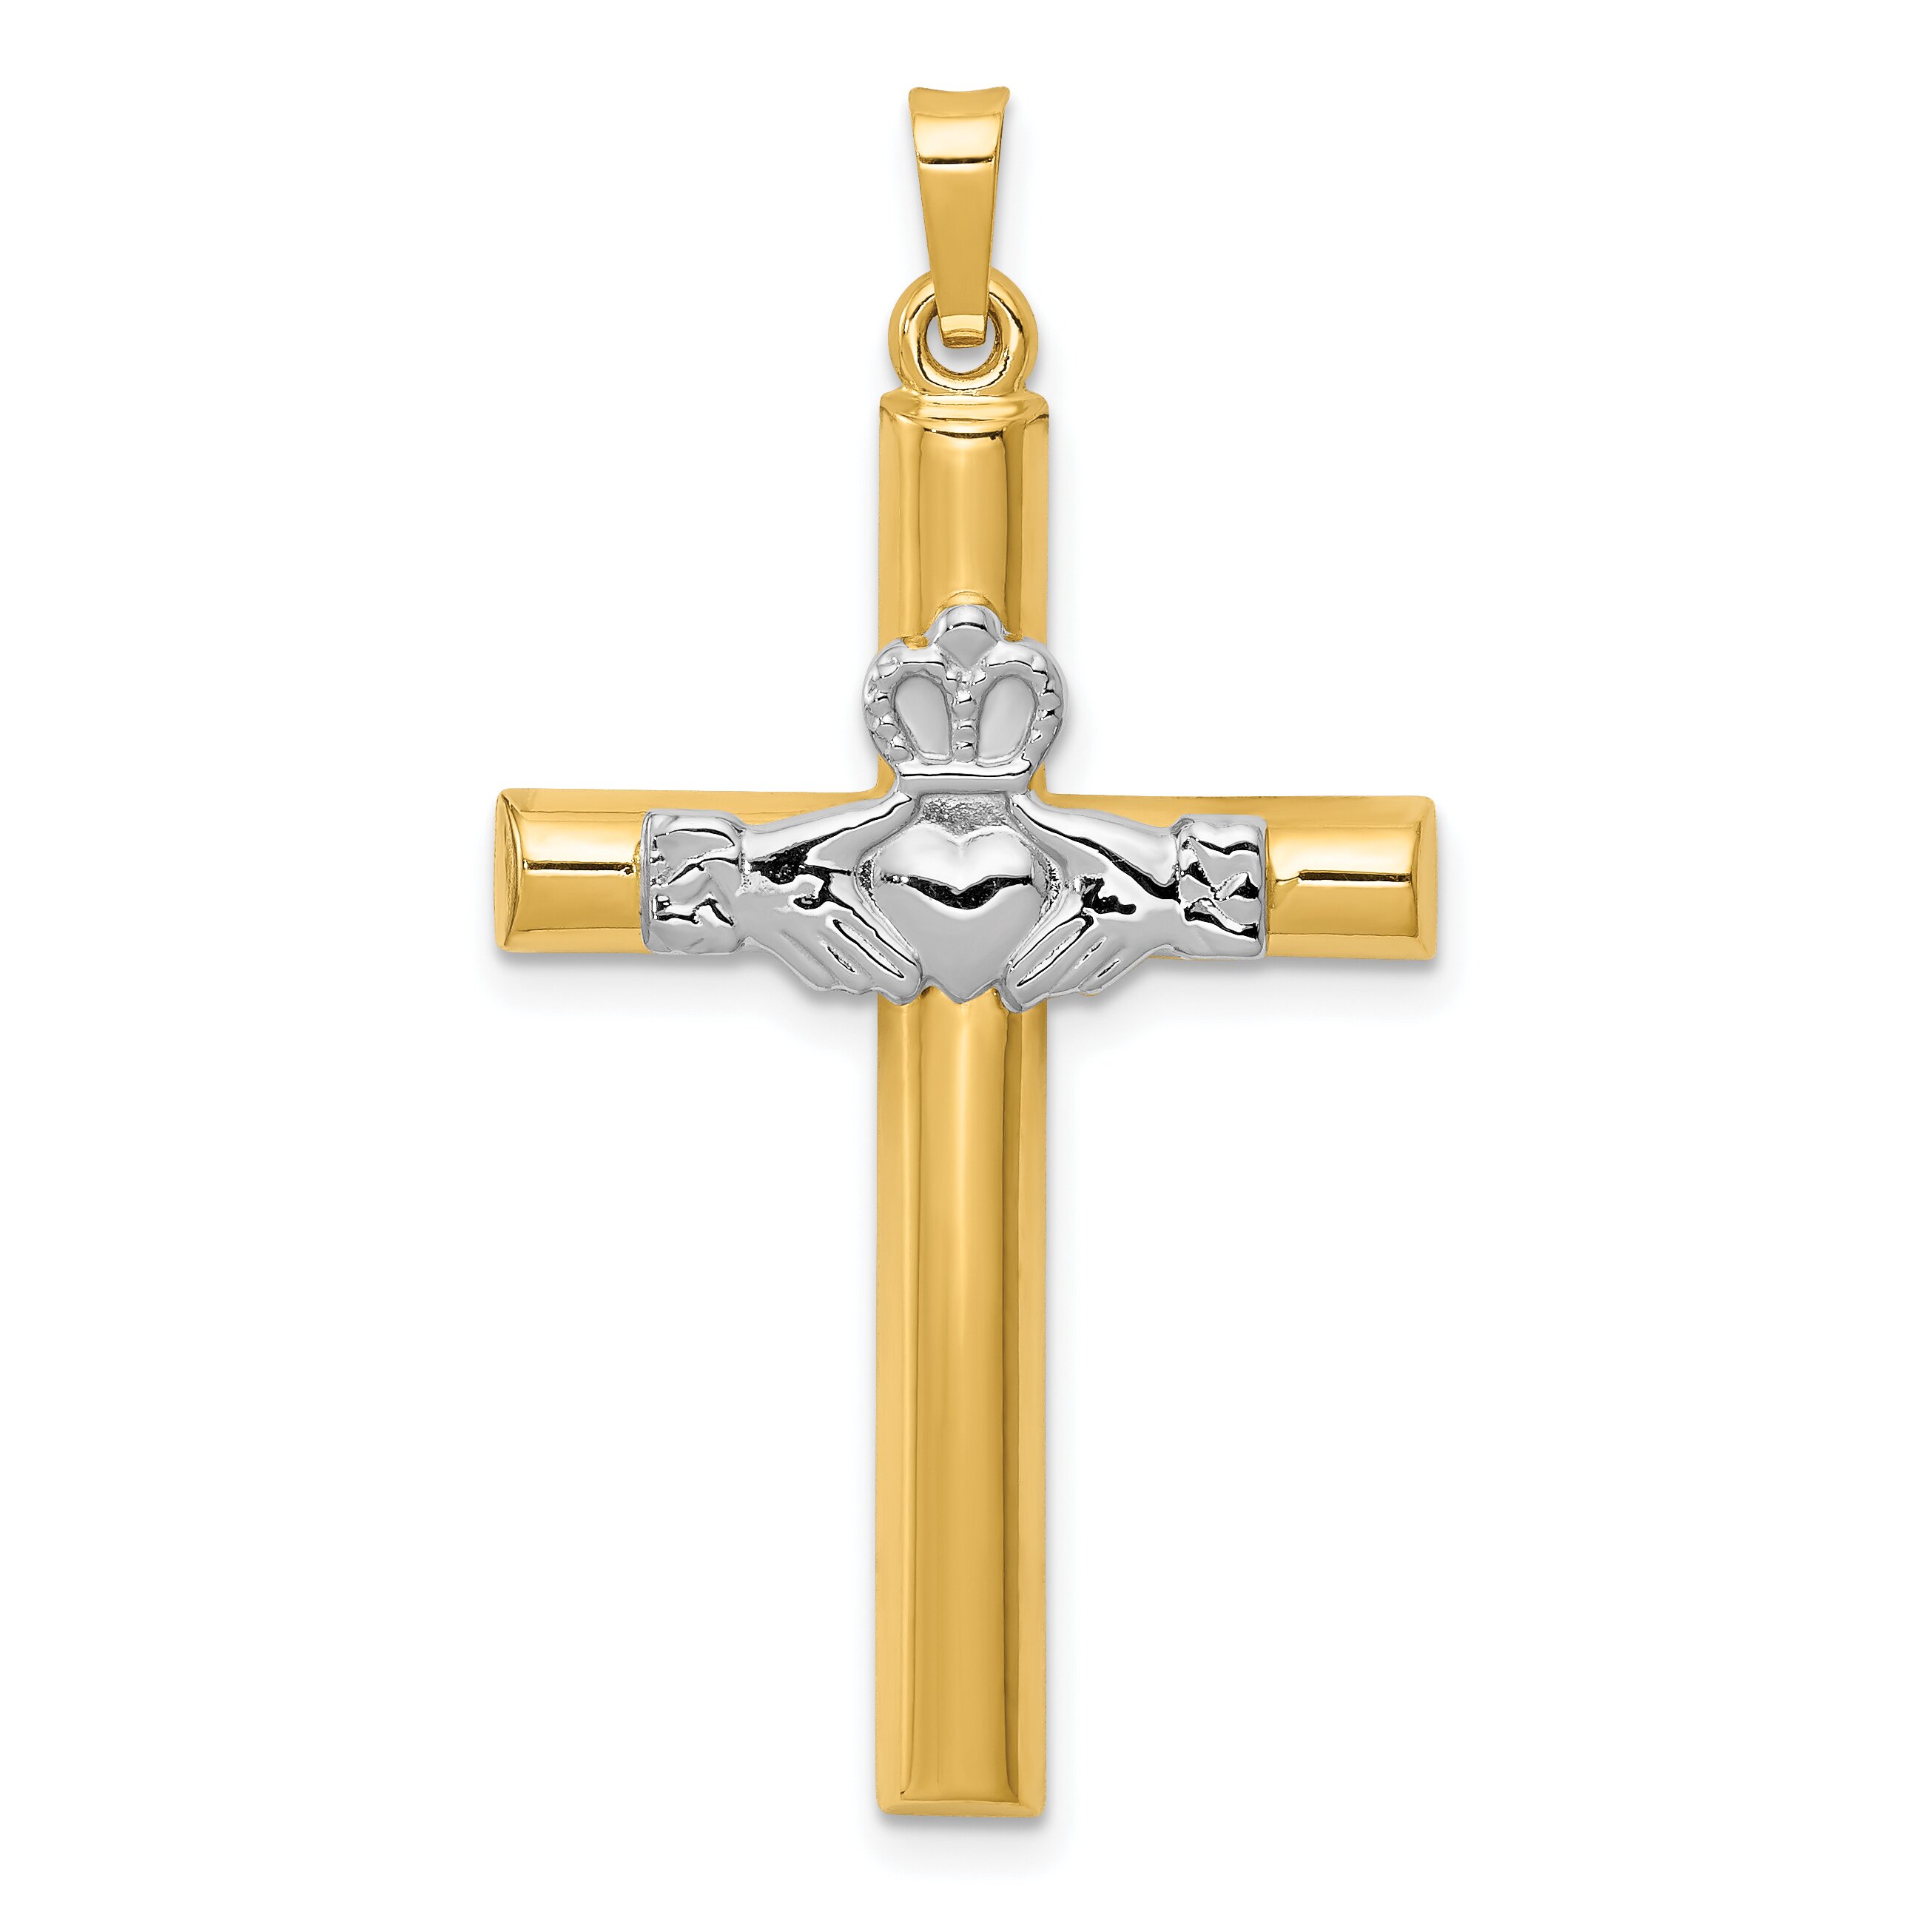 Findingking 14K Two Tone Gold Claddagh Cross Pendant